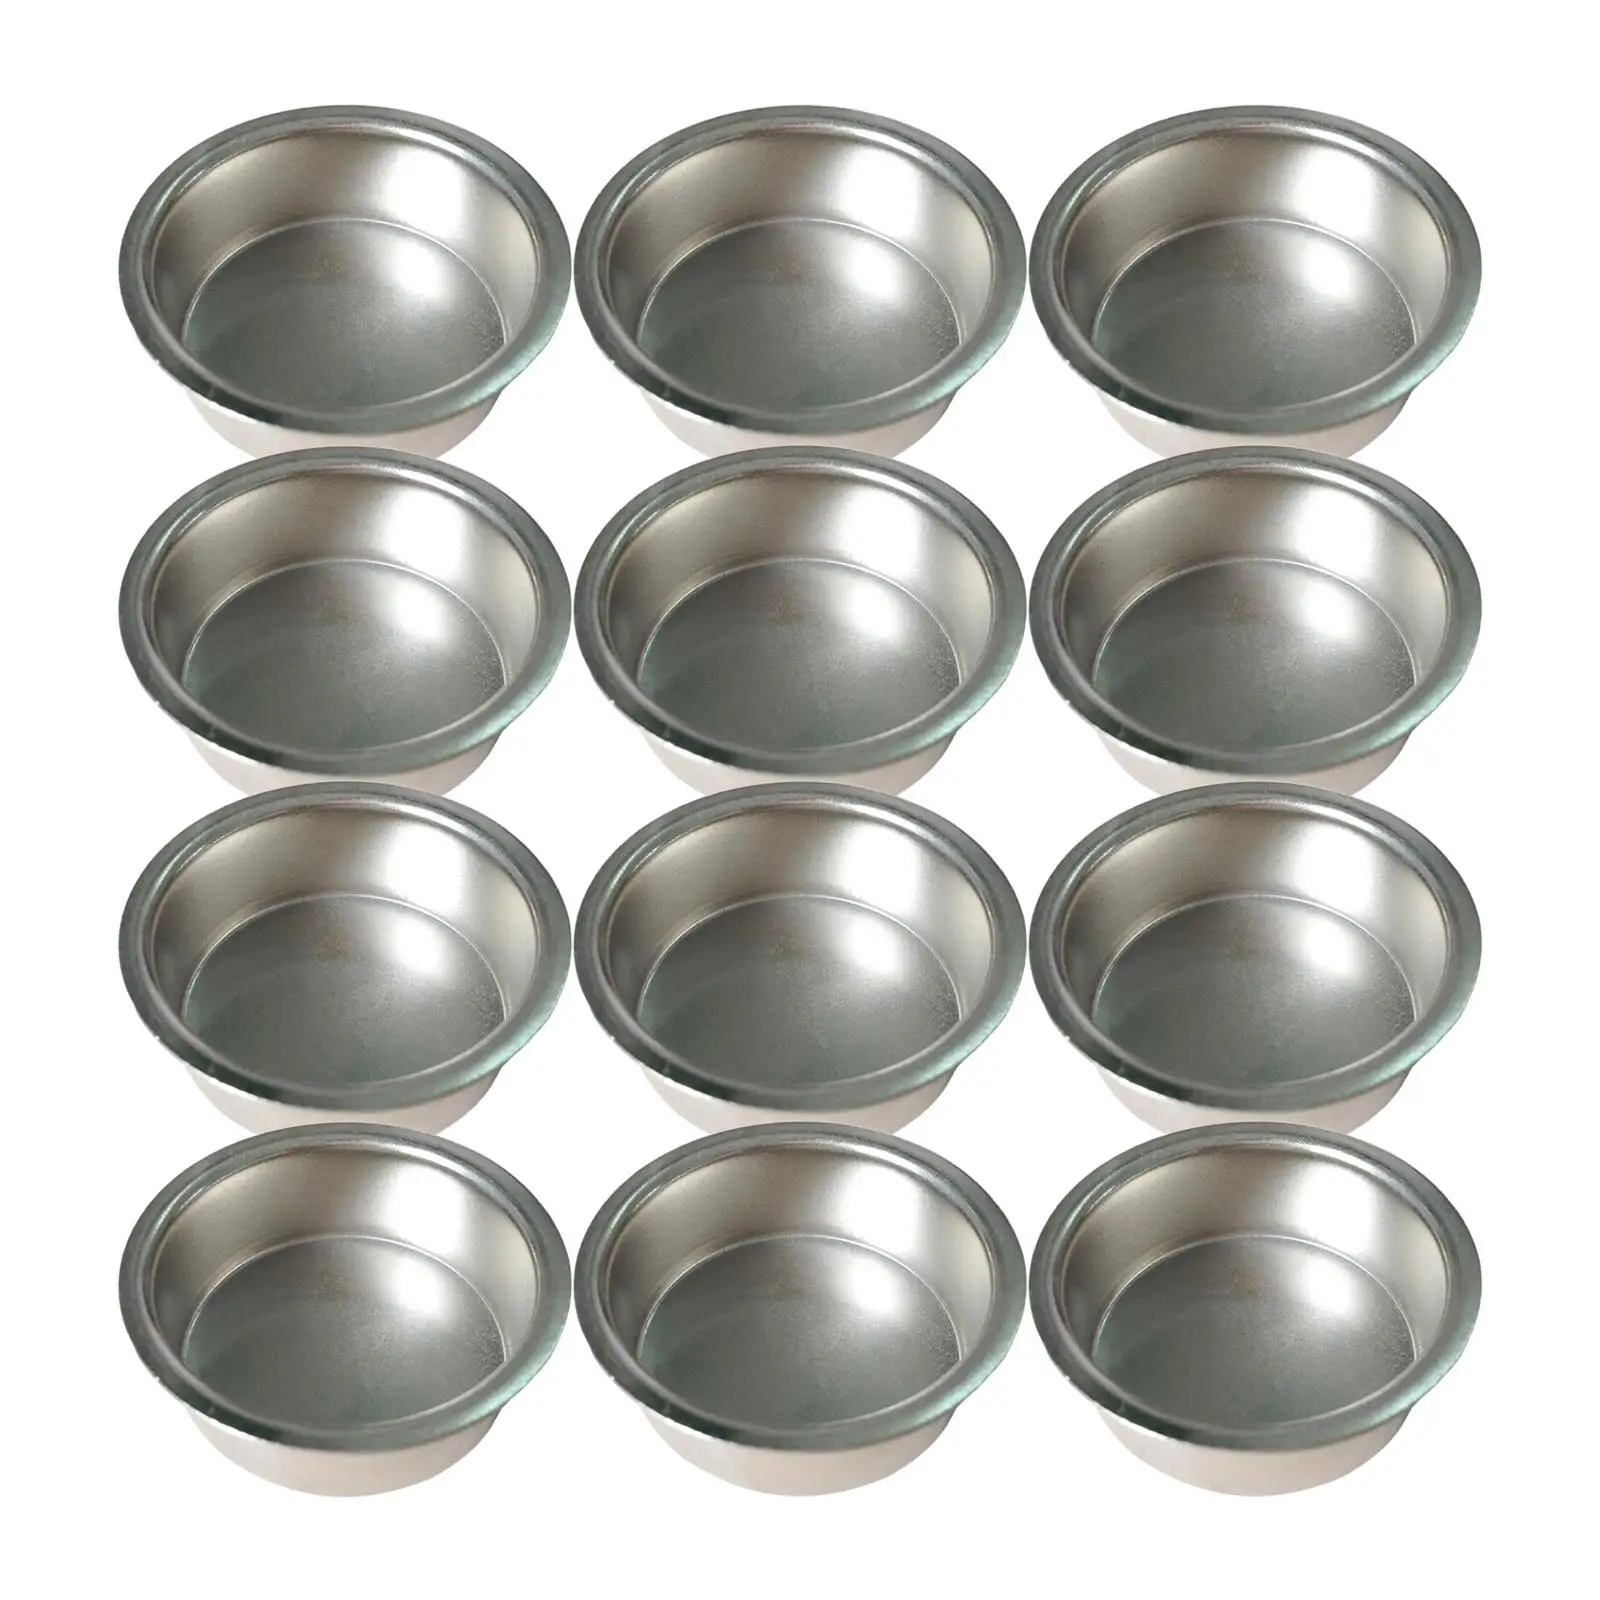 12Pcs Tea Light Candle Cups for Lamp or Candle Making Empty Tea Light Tins